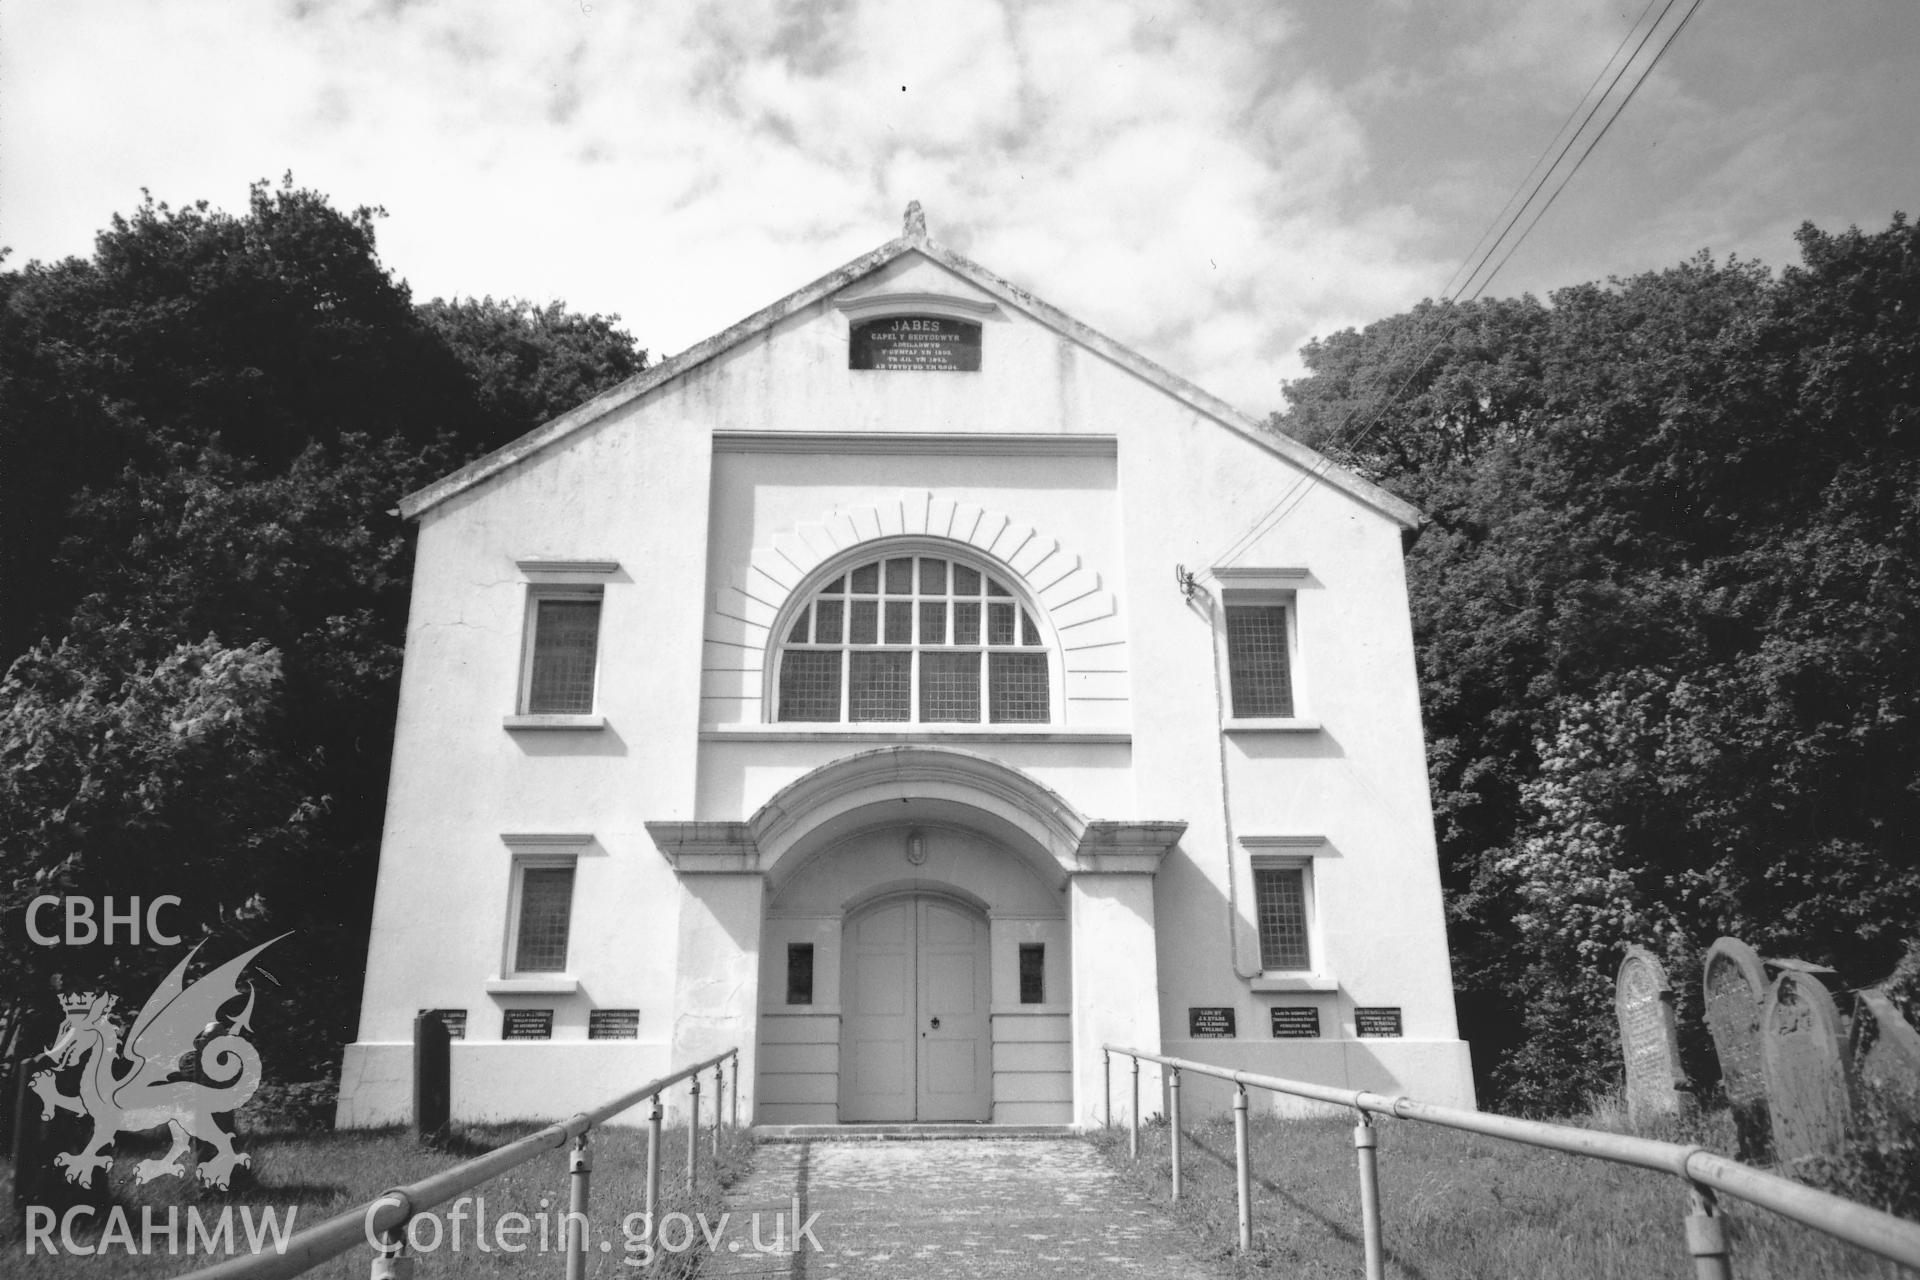 Digital copy of a black and white photograph showing a view of Jabez Baptist Chapel, Pontfaen, taken by Robert Scourfield, 1996.